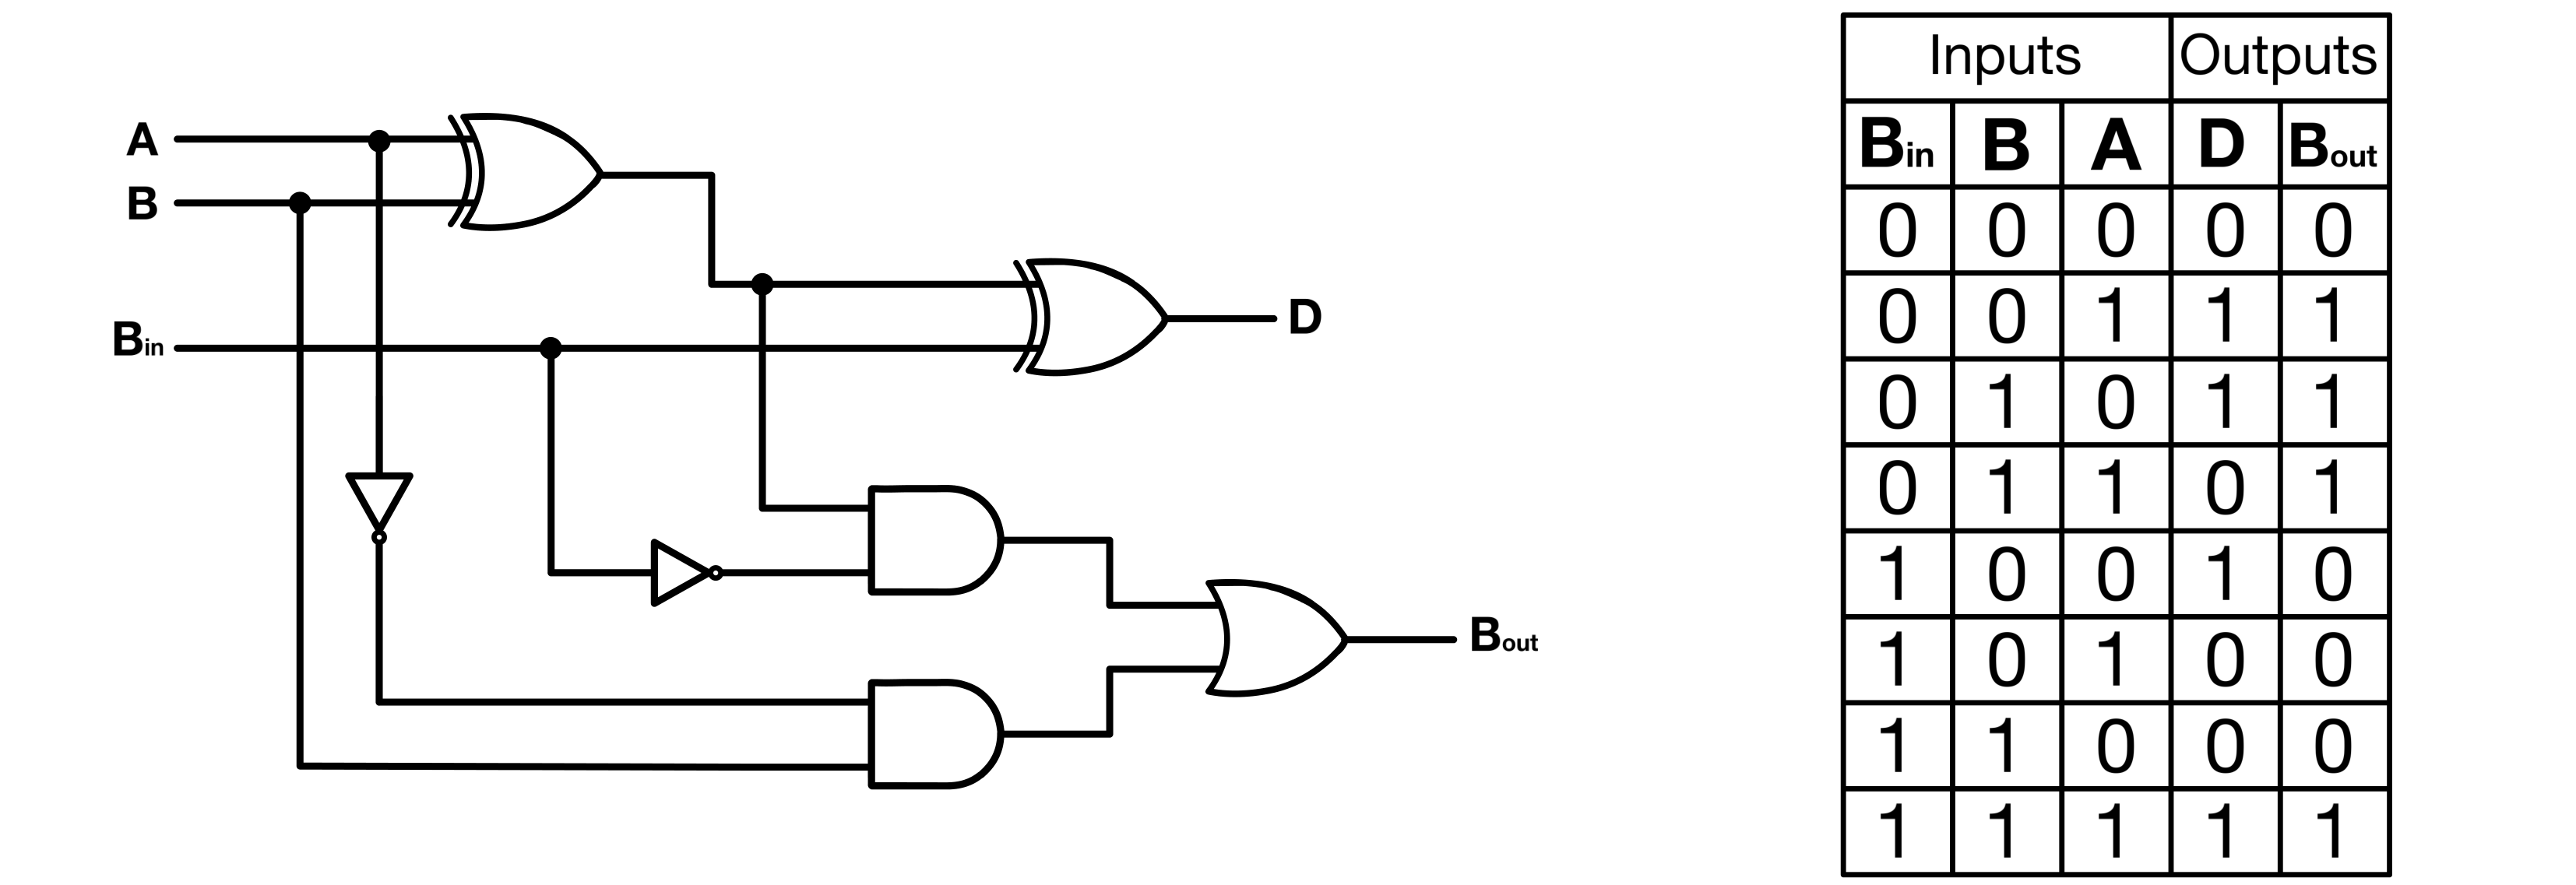 Figure 7: Full Subtractor Circuit and Truth Table